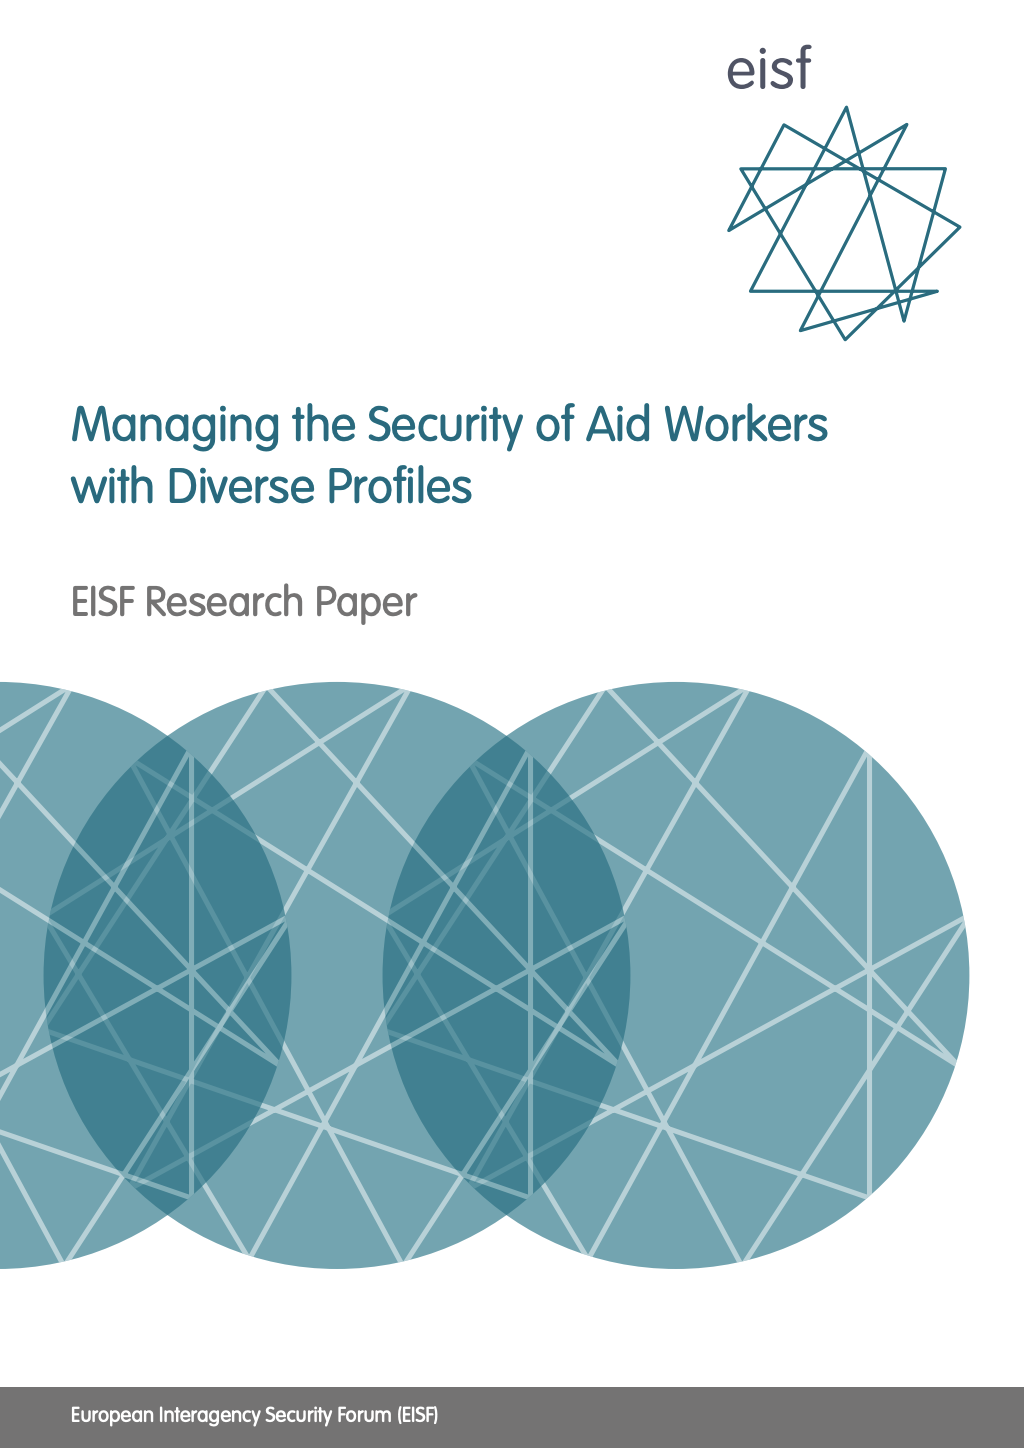 Managing the Security of Aid Workers with Diverse Profiles